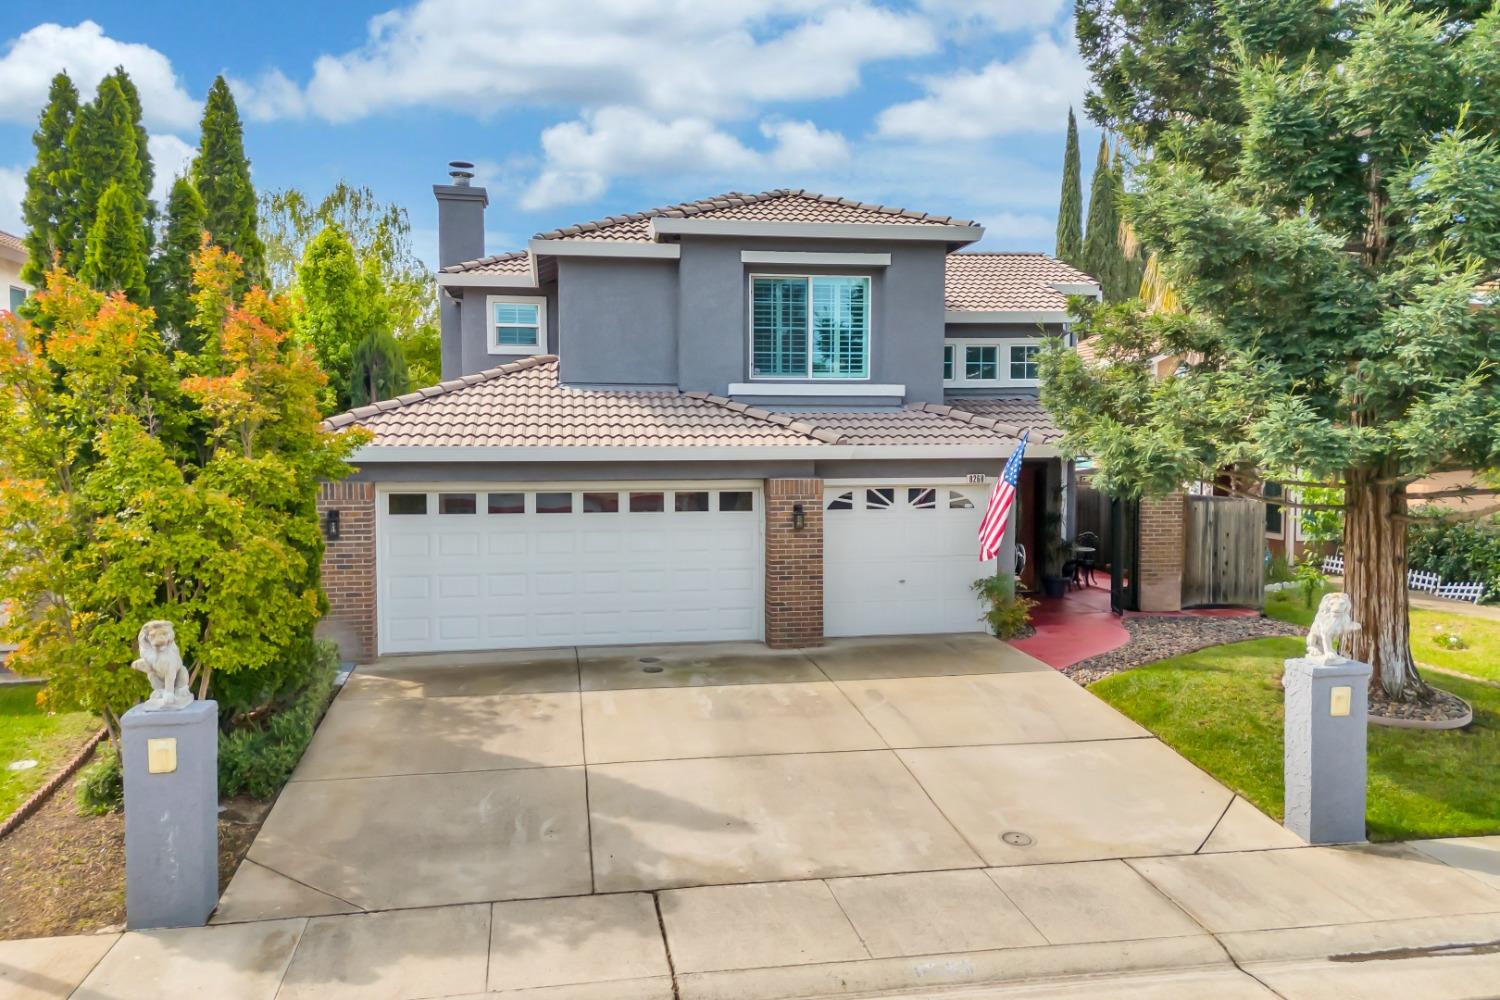 Discover this stunning gem in Elk Grove. Located in a quiet court, this home boasts numerous upgrade